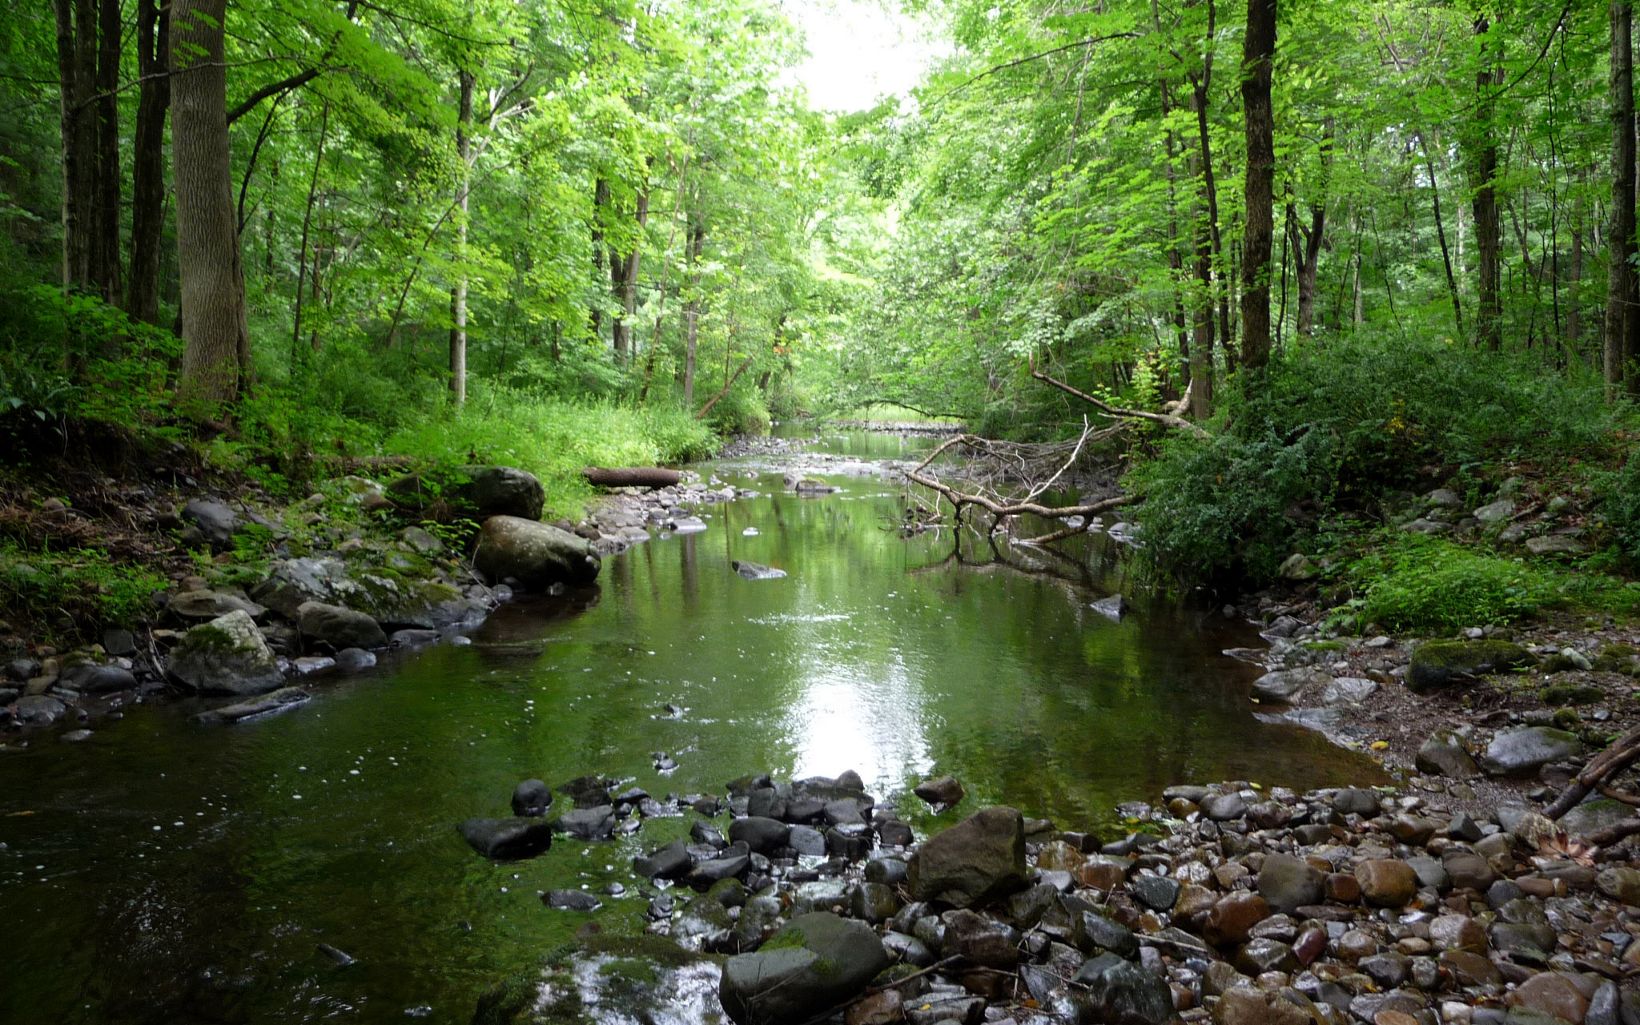 A stream runs through the shade of a lush, green forest in summertime.